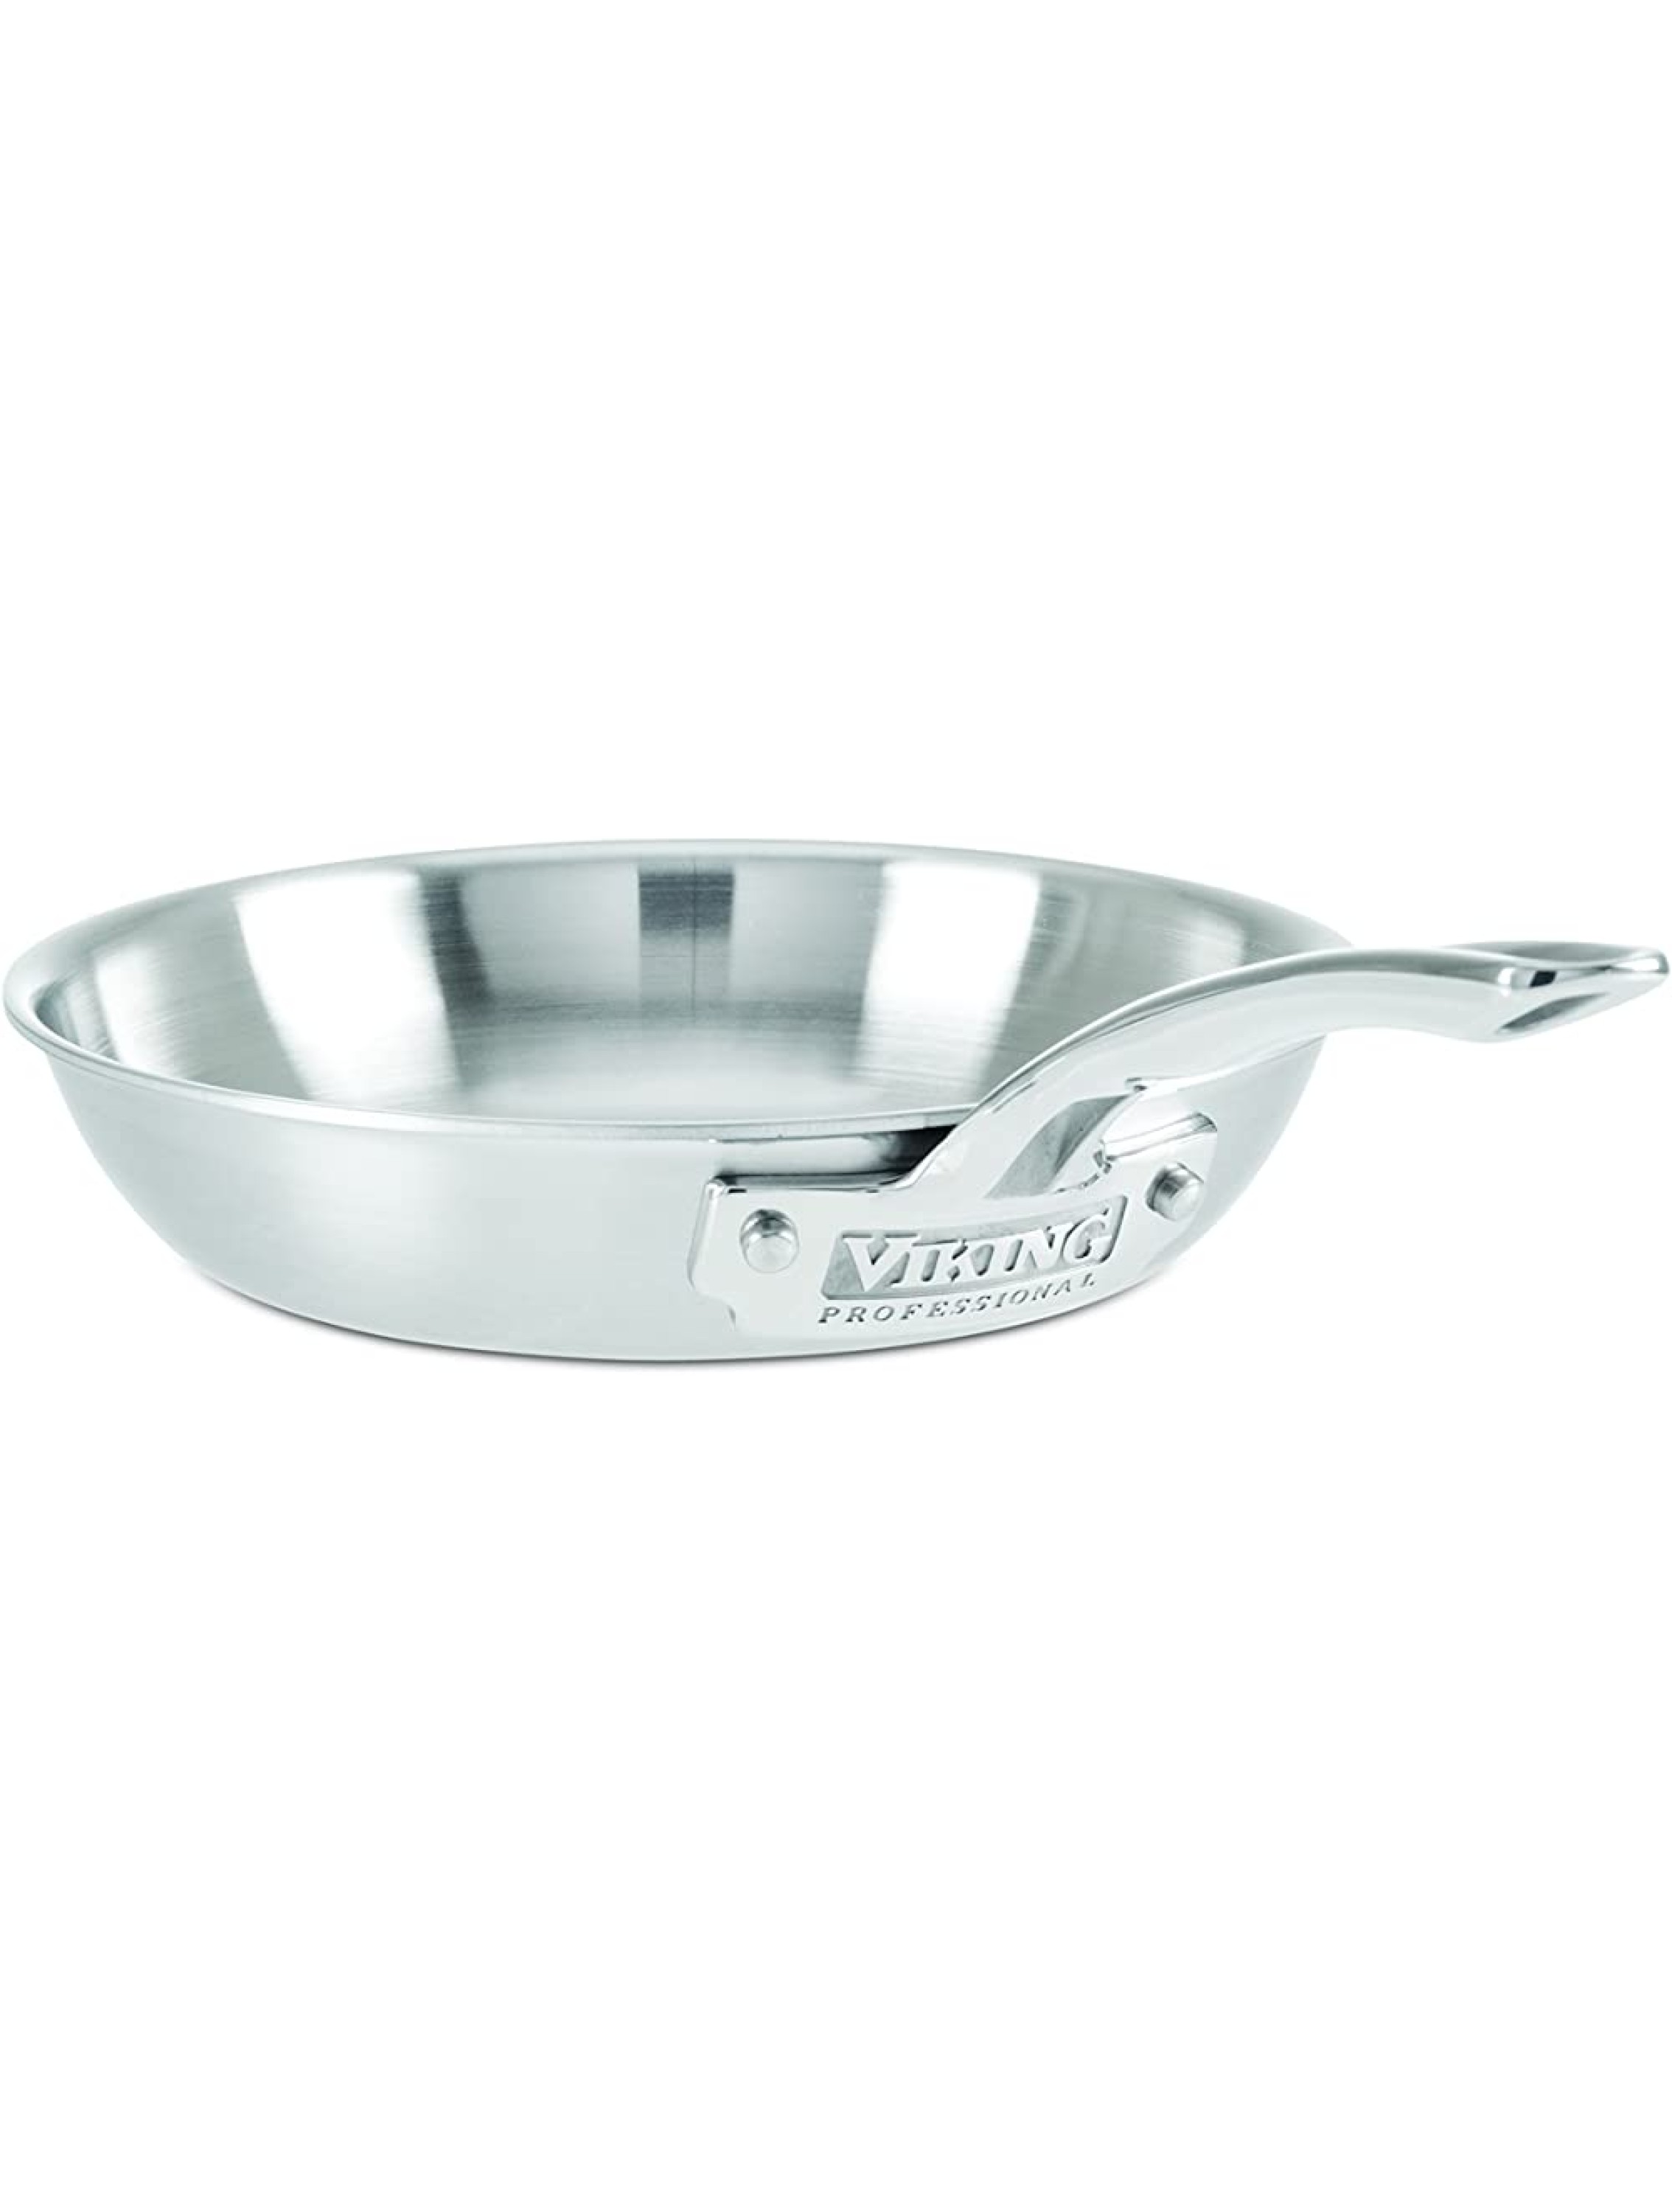 Viking Professional 5-Ply Stainless Steel Fry Pan 8 Inch - BIJNNWF8E